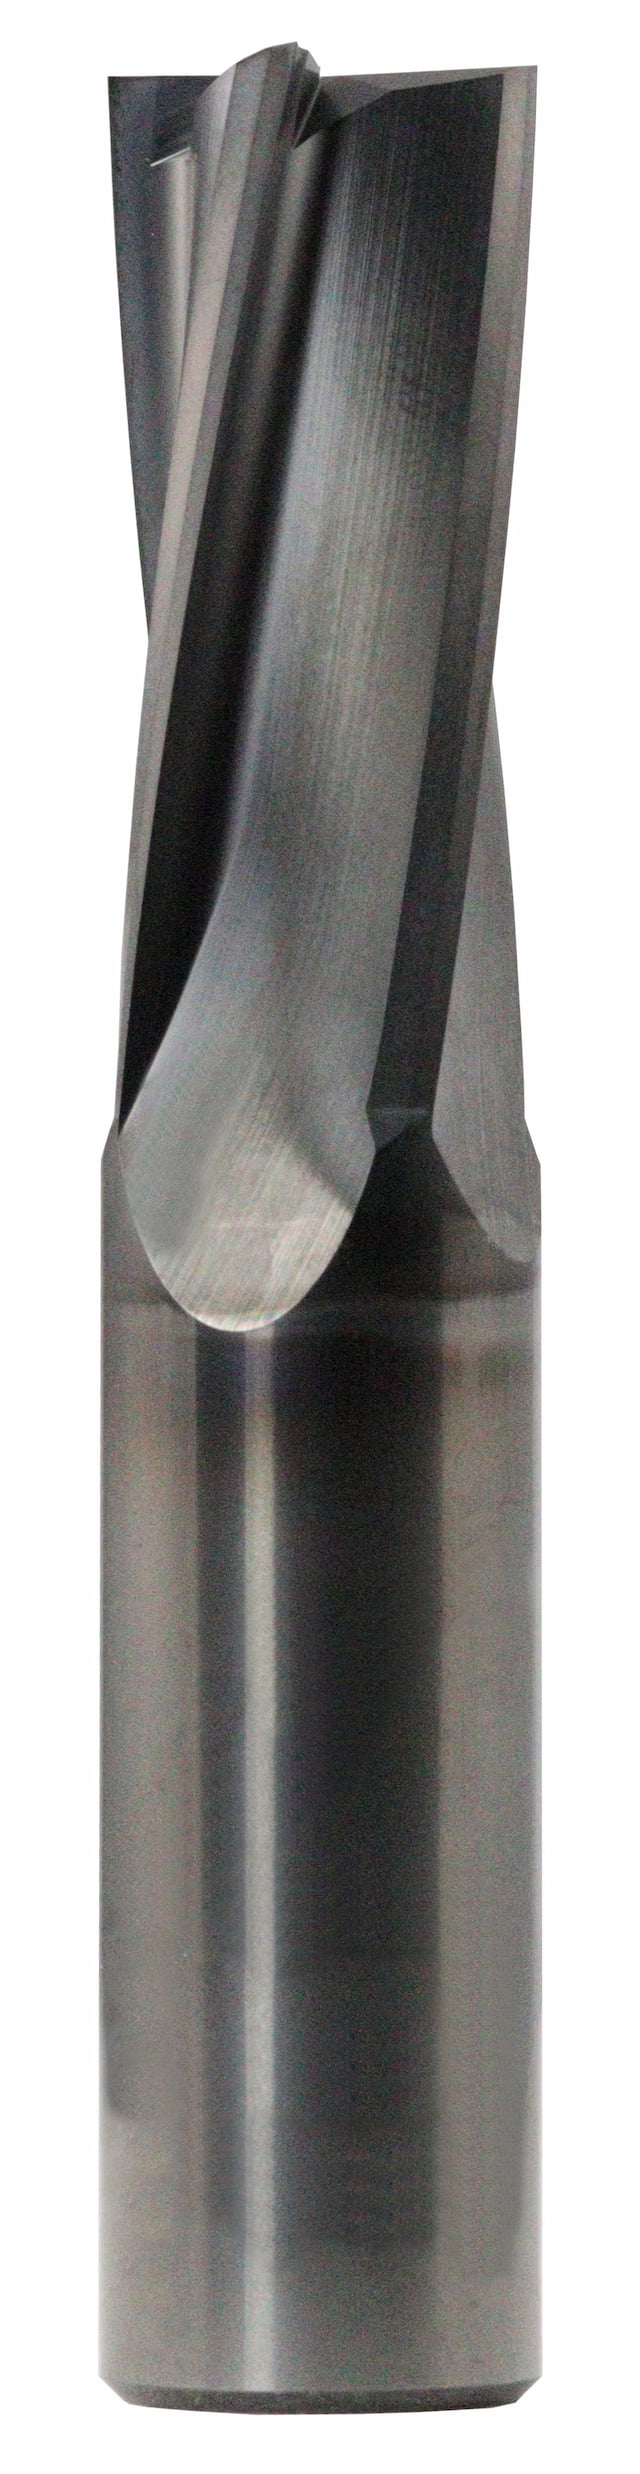 3/8" Dia, 4 Flute, Square End End Mill - 72981